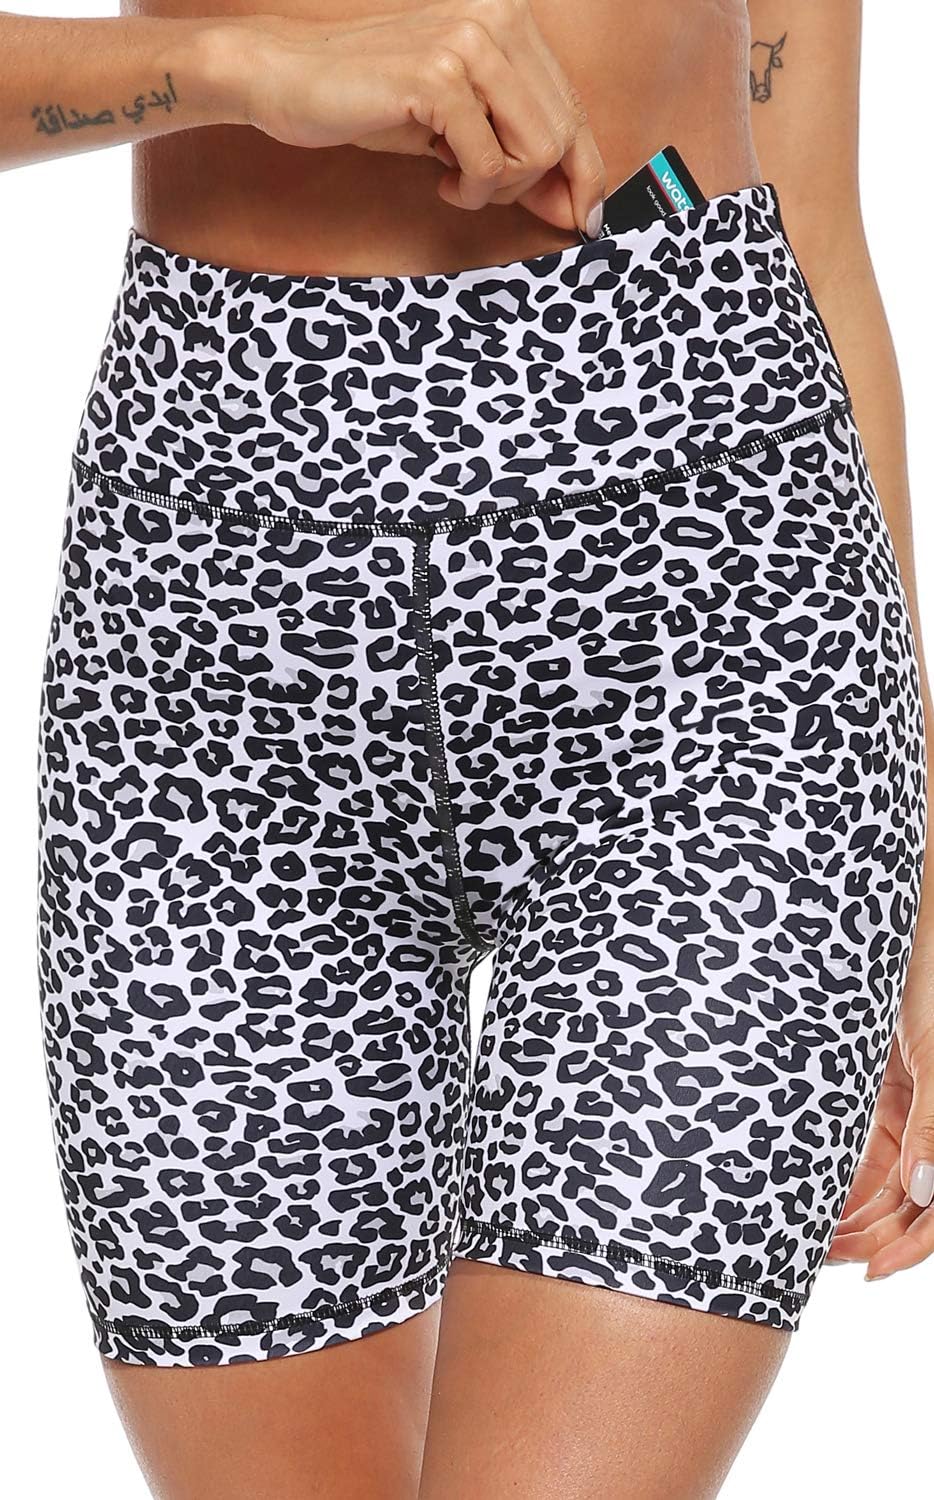 PERSIT Women's High Waist Print Workout Yoga Shorts: A Review of Comfort and Functionality